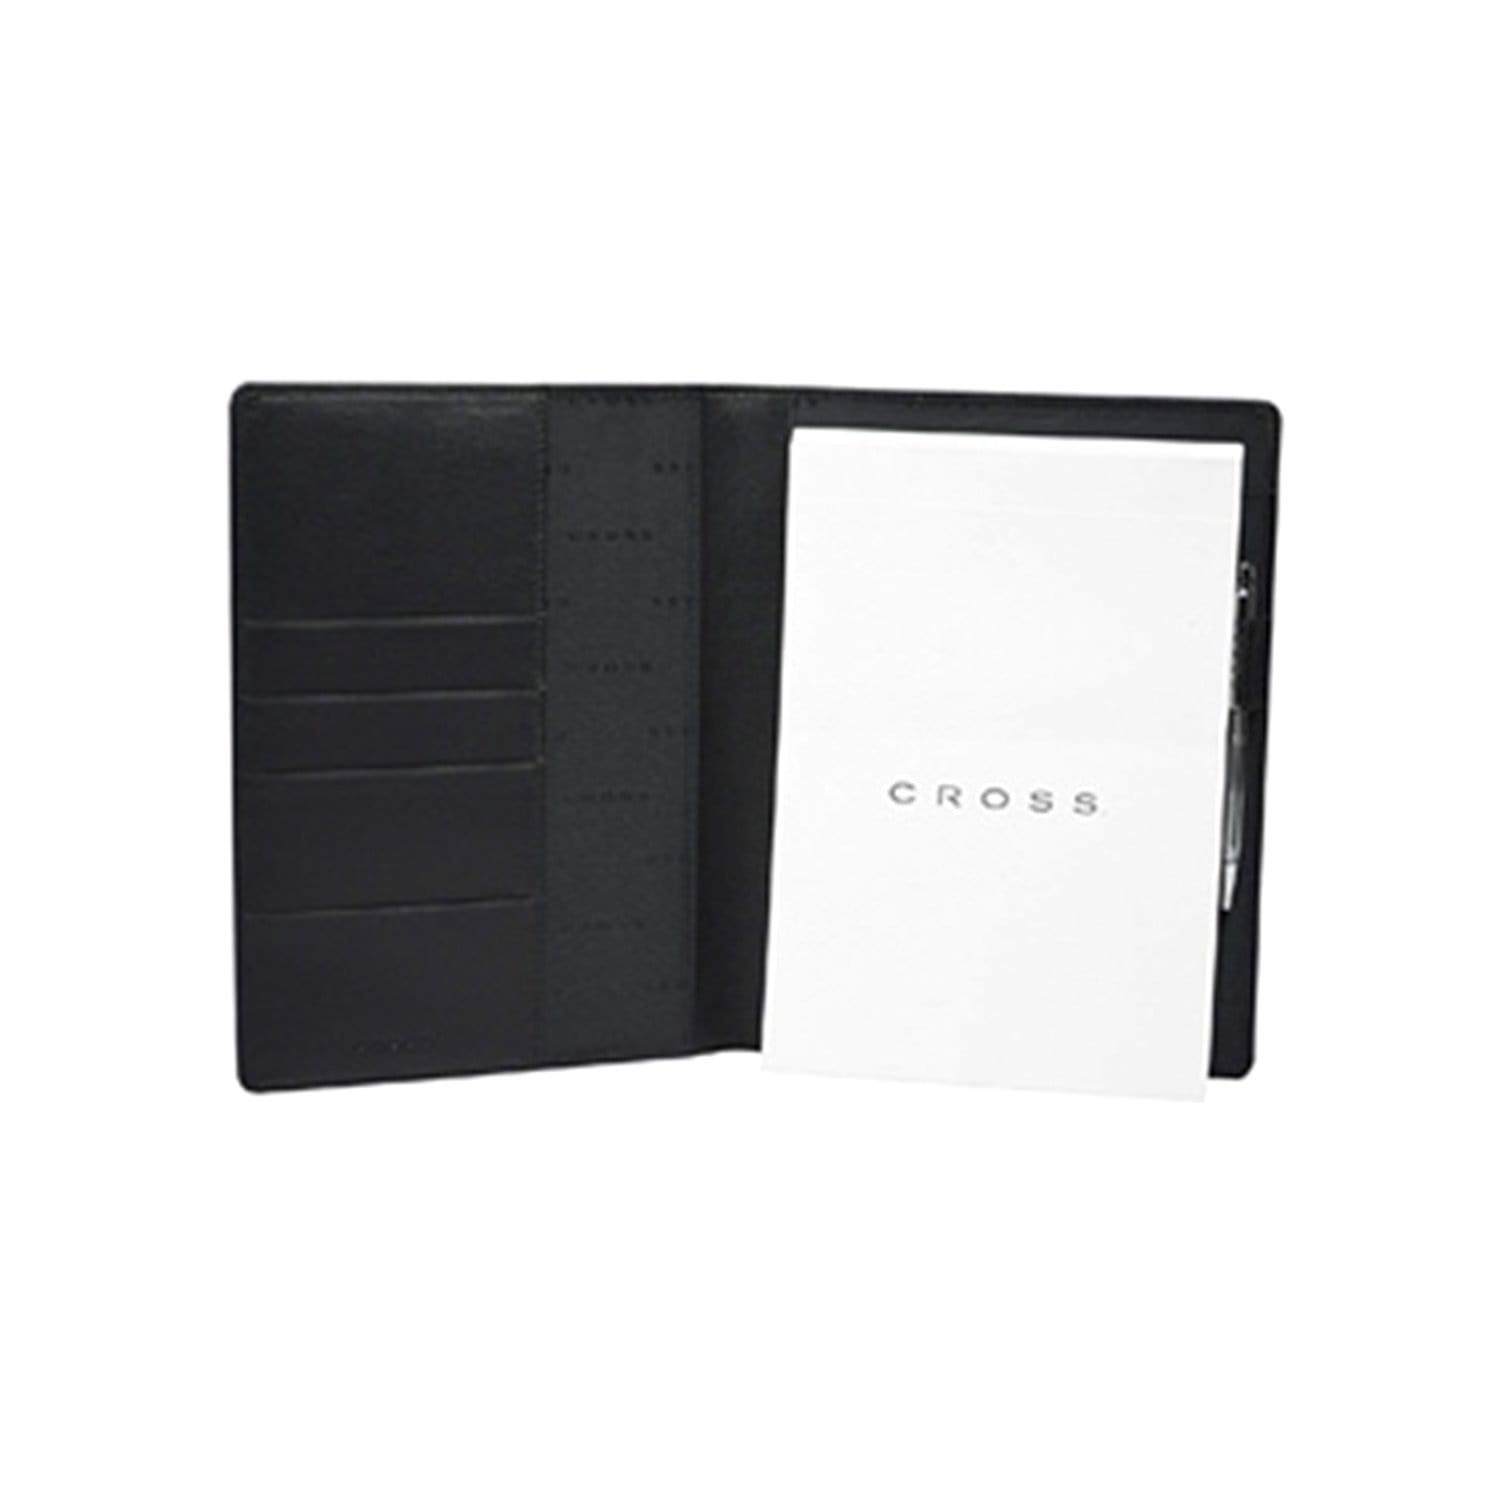 Cross A5 Planner with Cross Leather Agenda Pen - Black - AC248329B-1 - Jashanmal Home